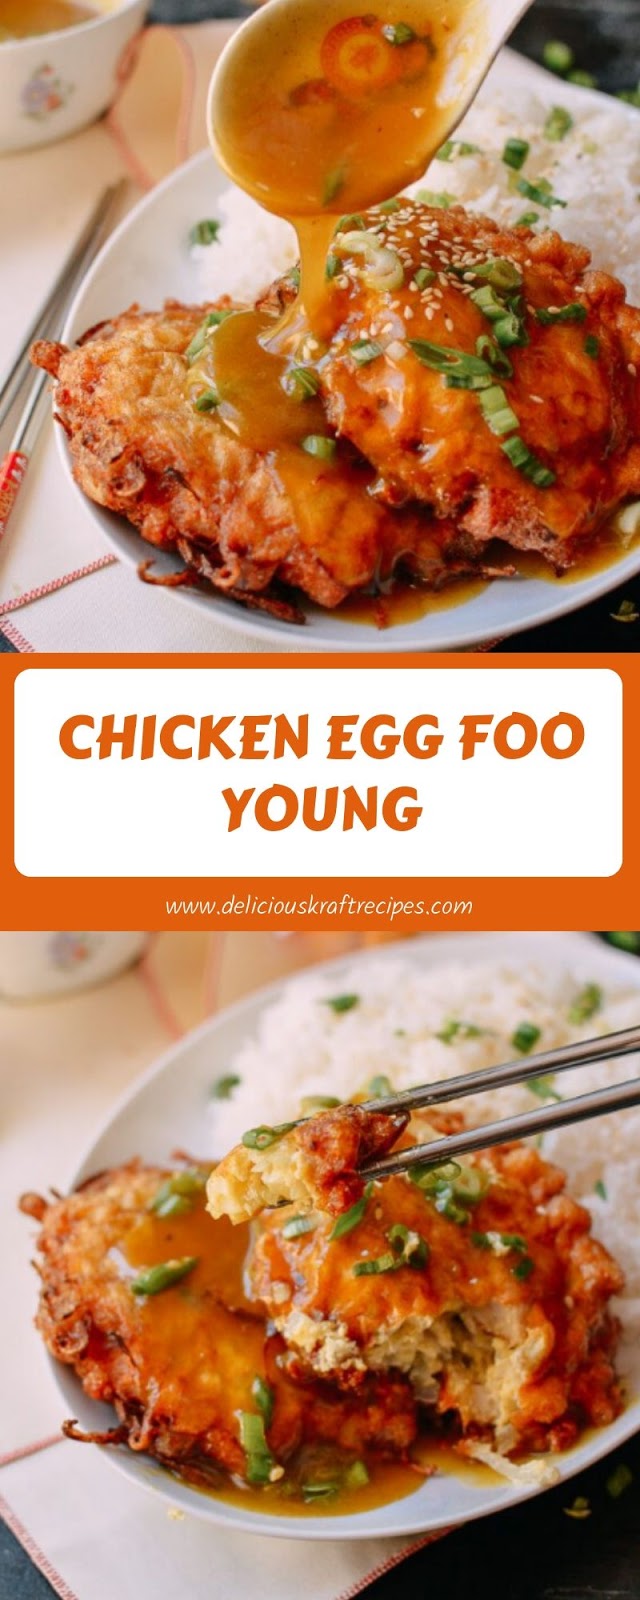 CHICKEN EGG FOO YOUNG